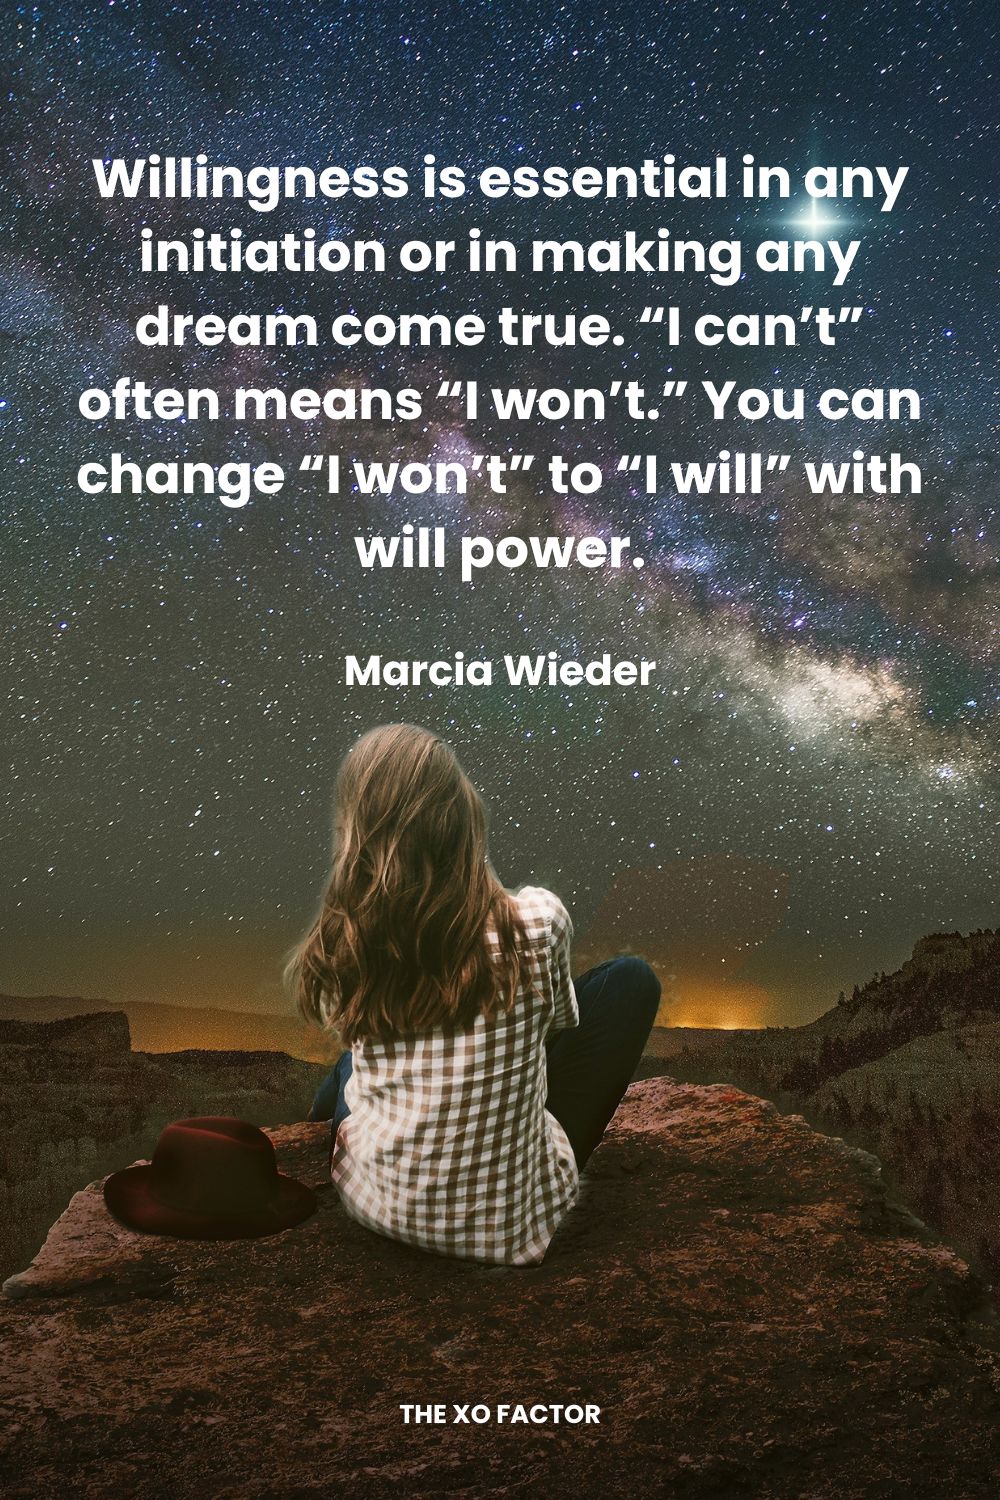 Willingness is essential in any initiation or in making any dream come true.  “I can’t” often means “I won’t.”  You can change “I won’t” to “I will” with will power. Marcia Wieder